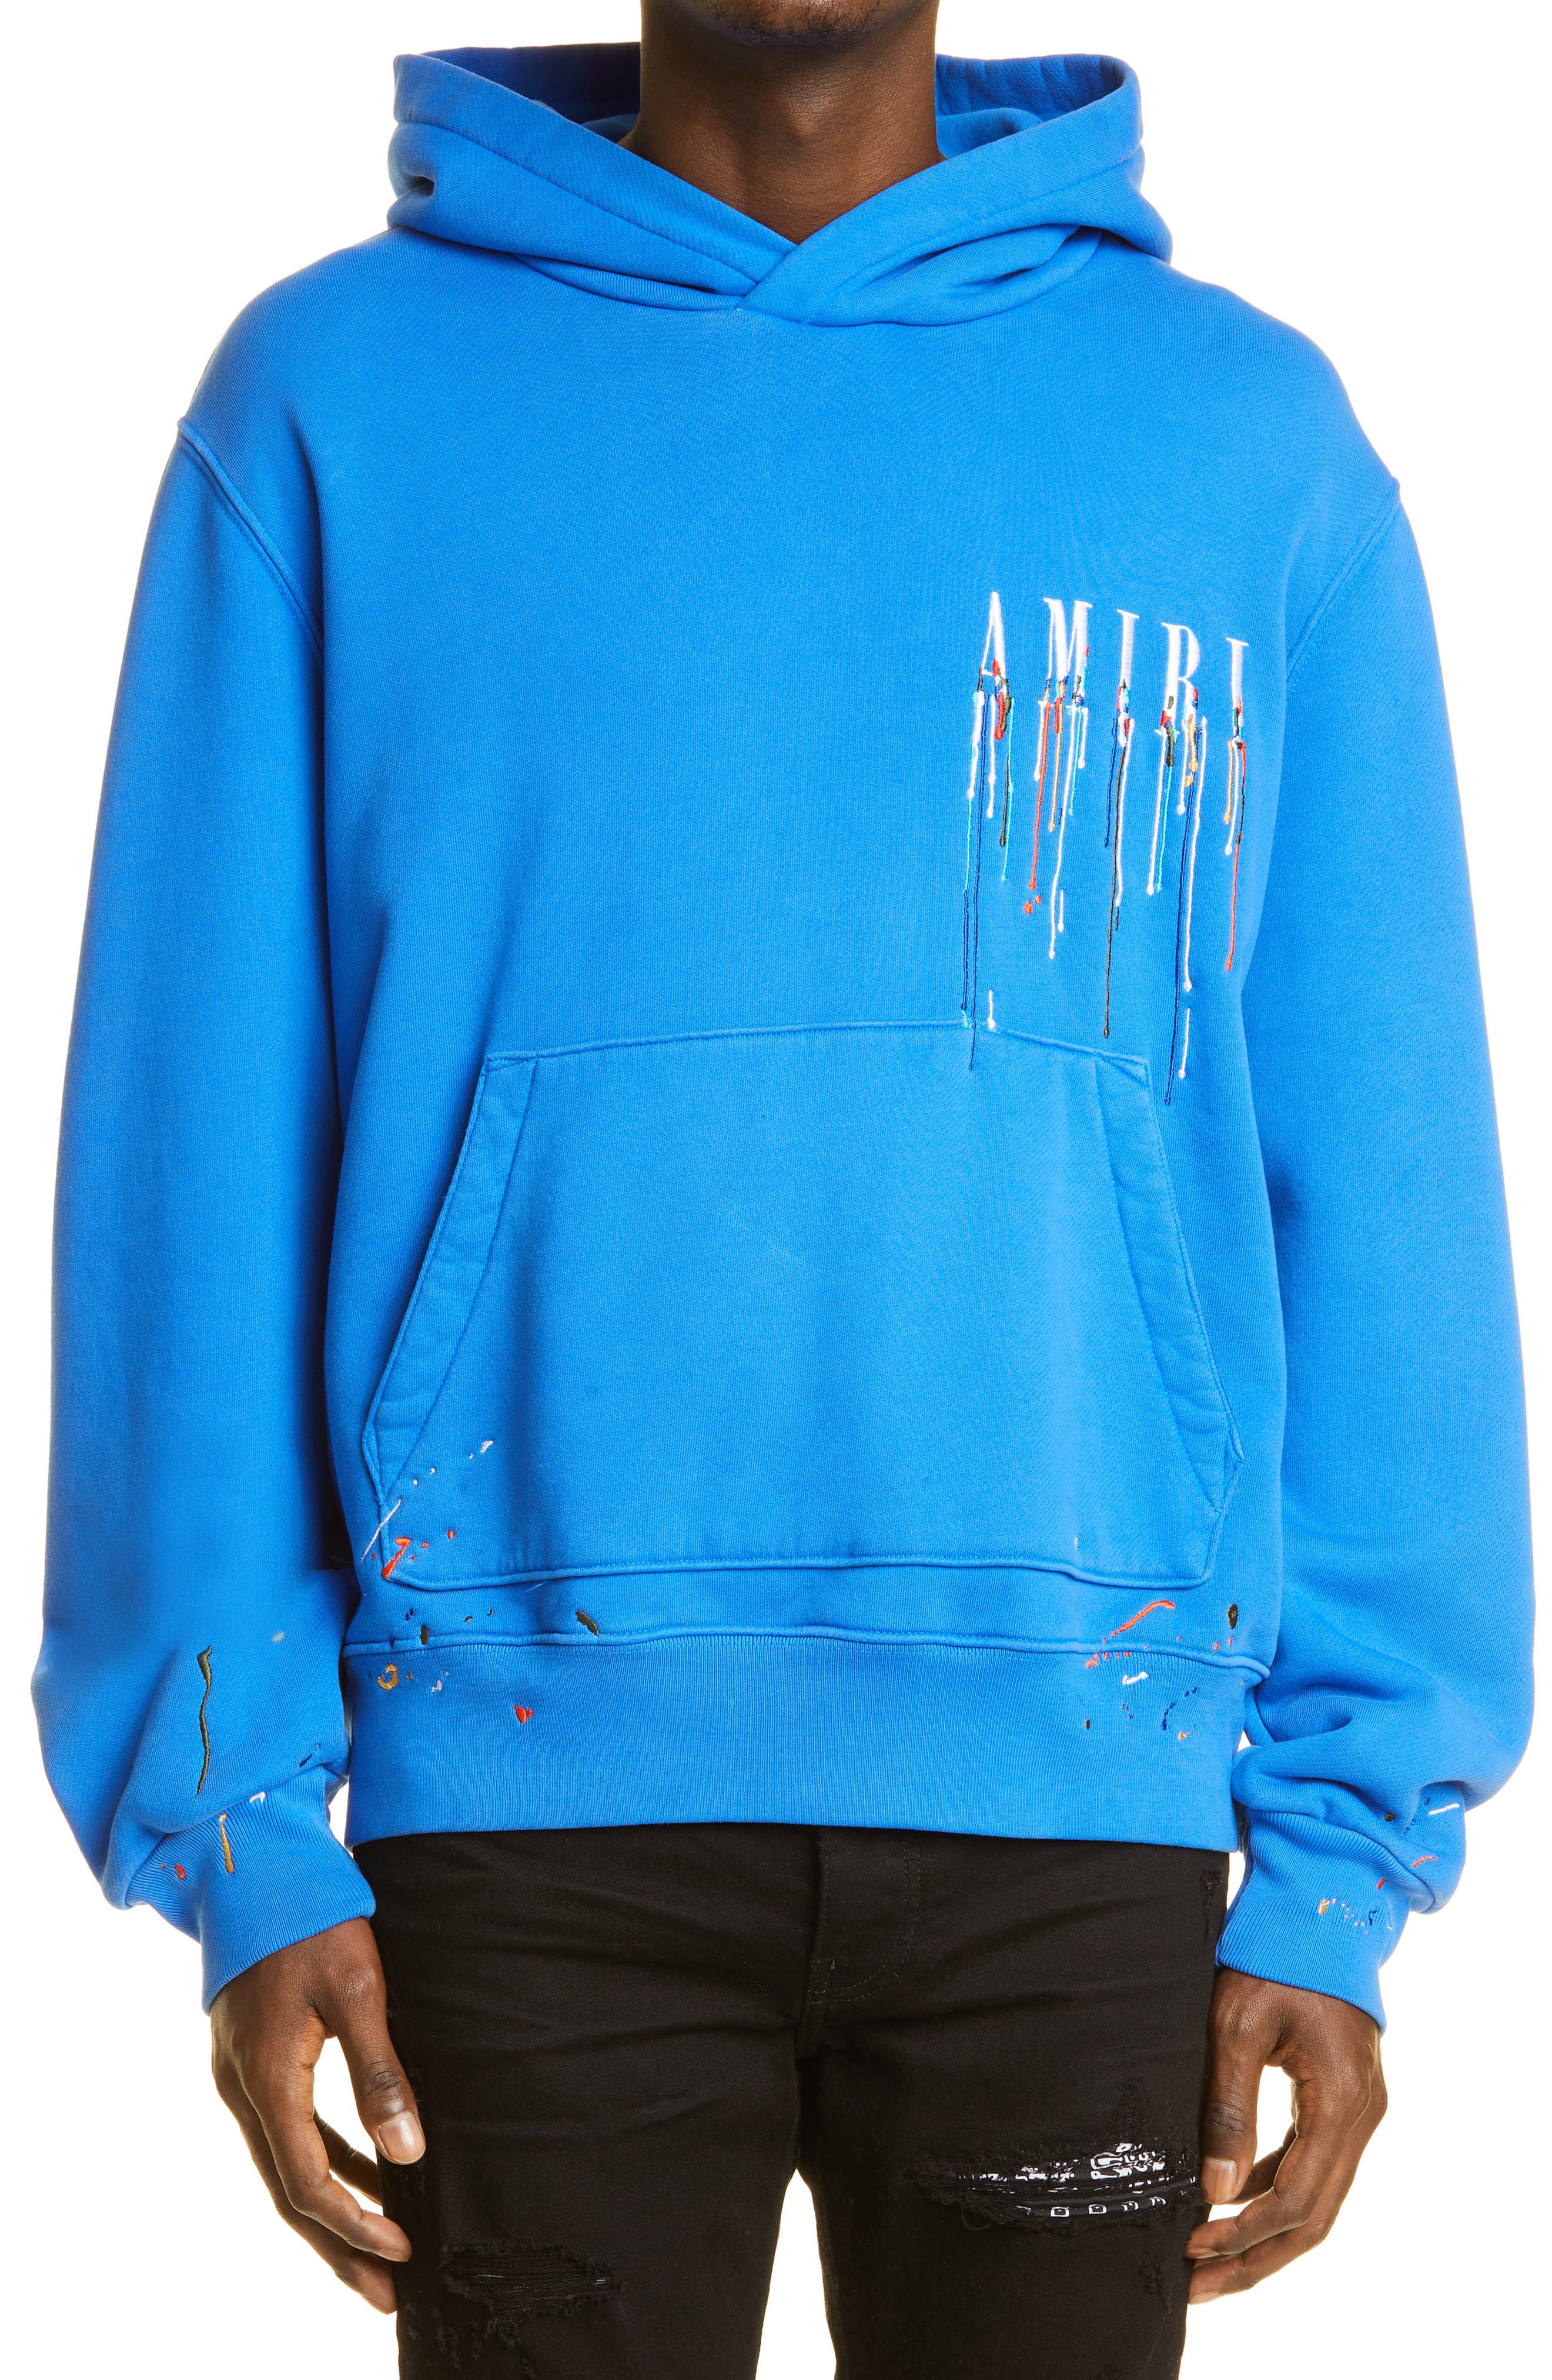 AMIRI Embroidered Paint Drip Core Logo Hoodie in Princess Blue/White at Nordstrom, Size Xx-Large